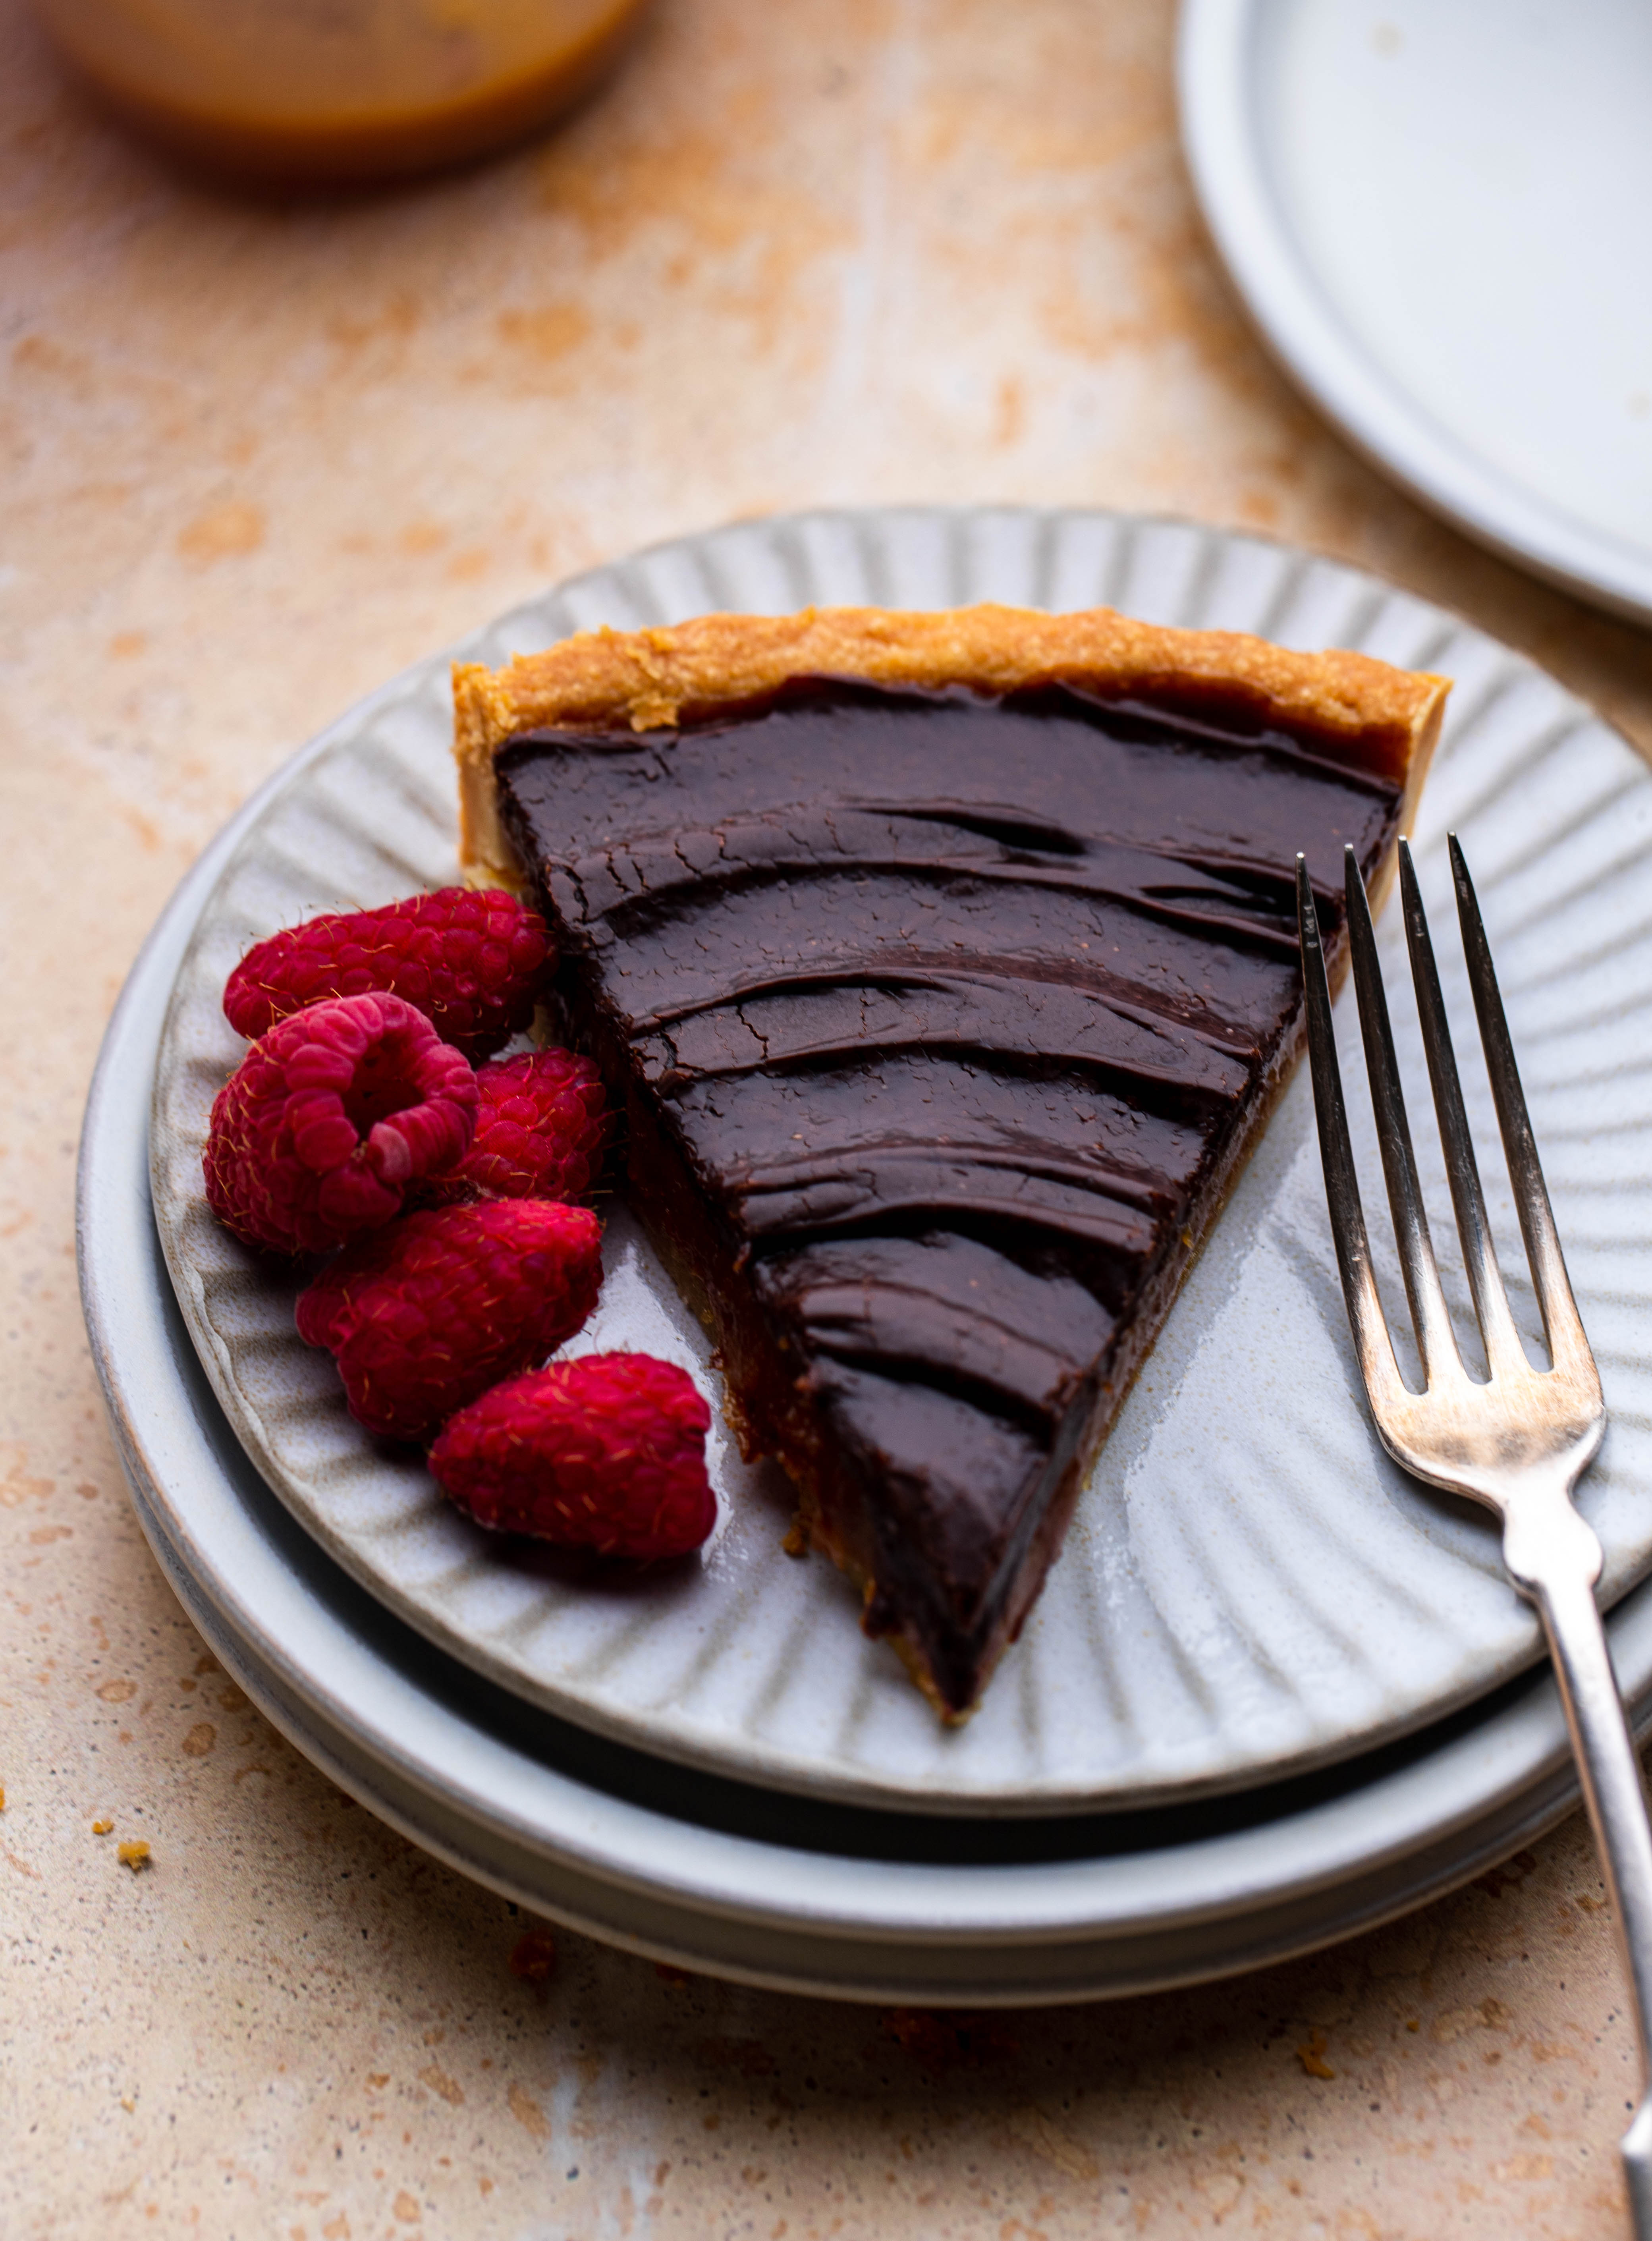 This Chocolate Caramel Tart is one of the most rich, decadent and flavorful desserts you can make in your own kitchen.